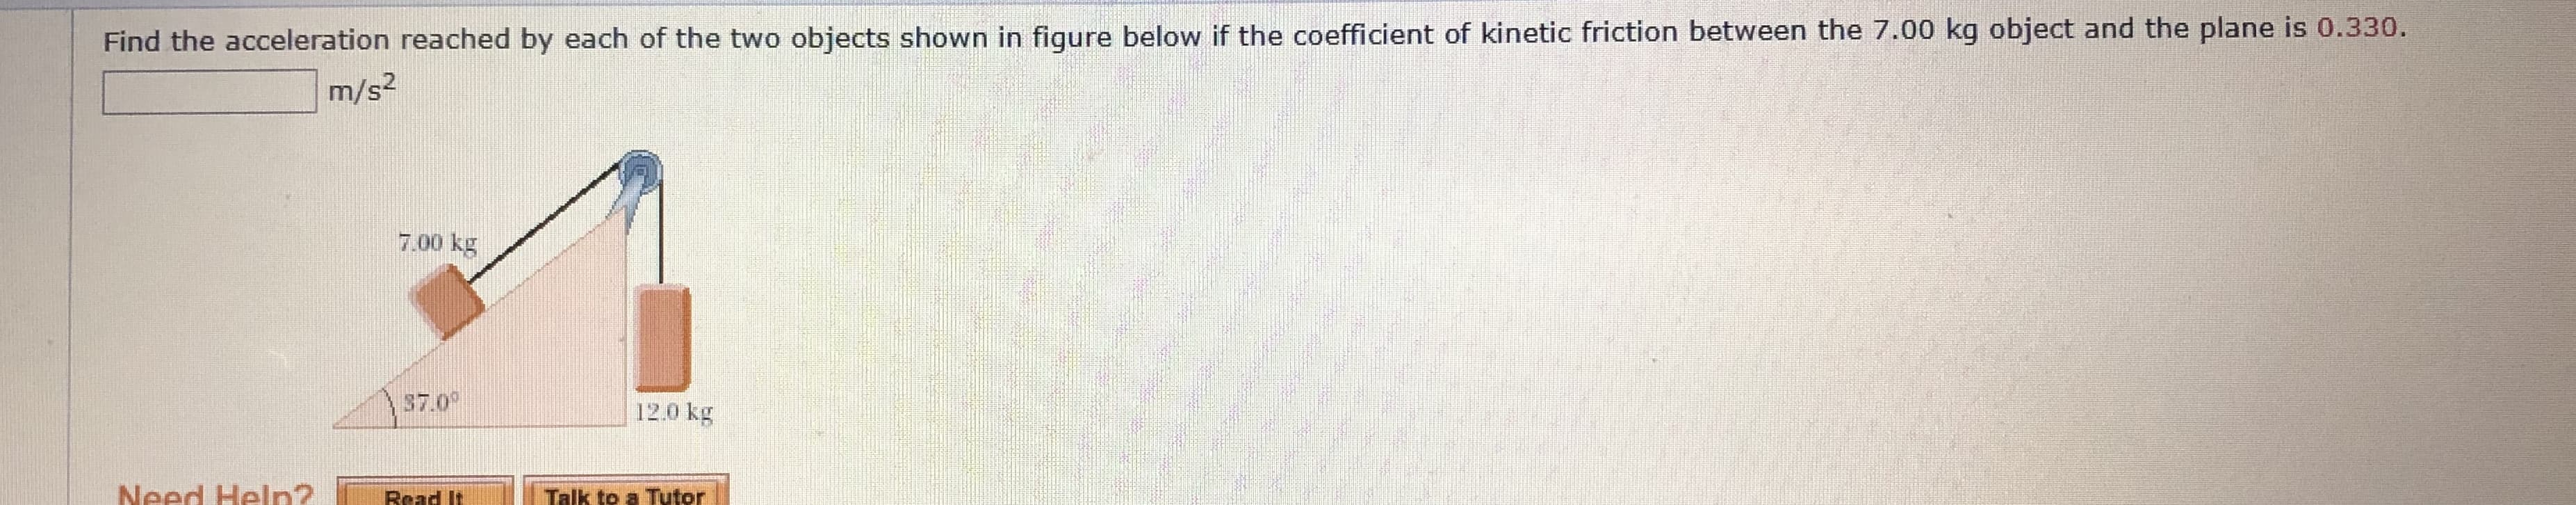 Find the acceleration reached by each of the two objects shown in figure below if the coefficient of kinetic friction between the 7.00 kg object and the plane is 0.330.
m/s2
7.00 kg
57.0°
12.0 kg
Need Helpn?
Read It
Talk to a Tutor
